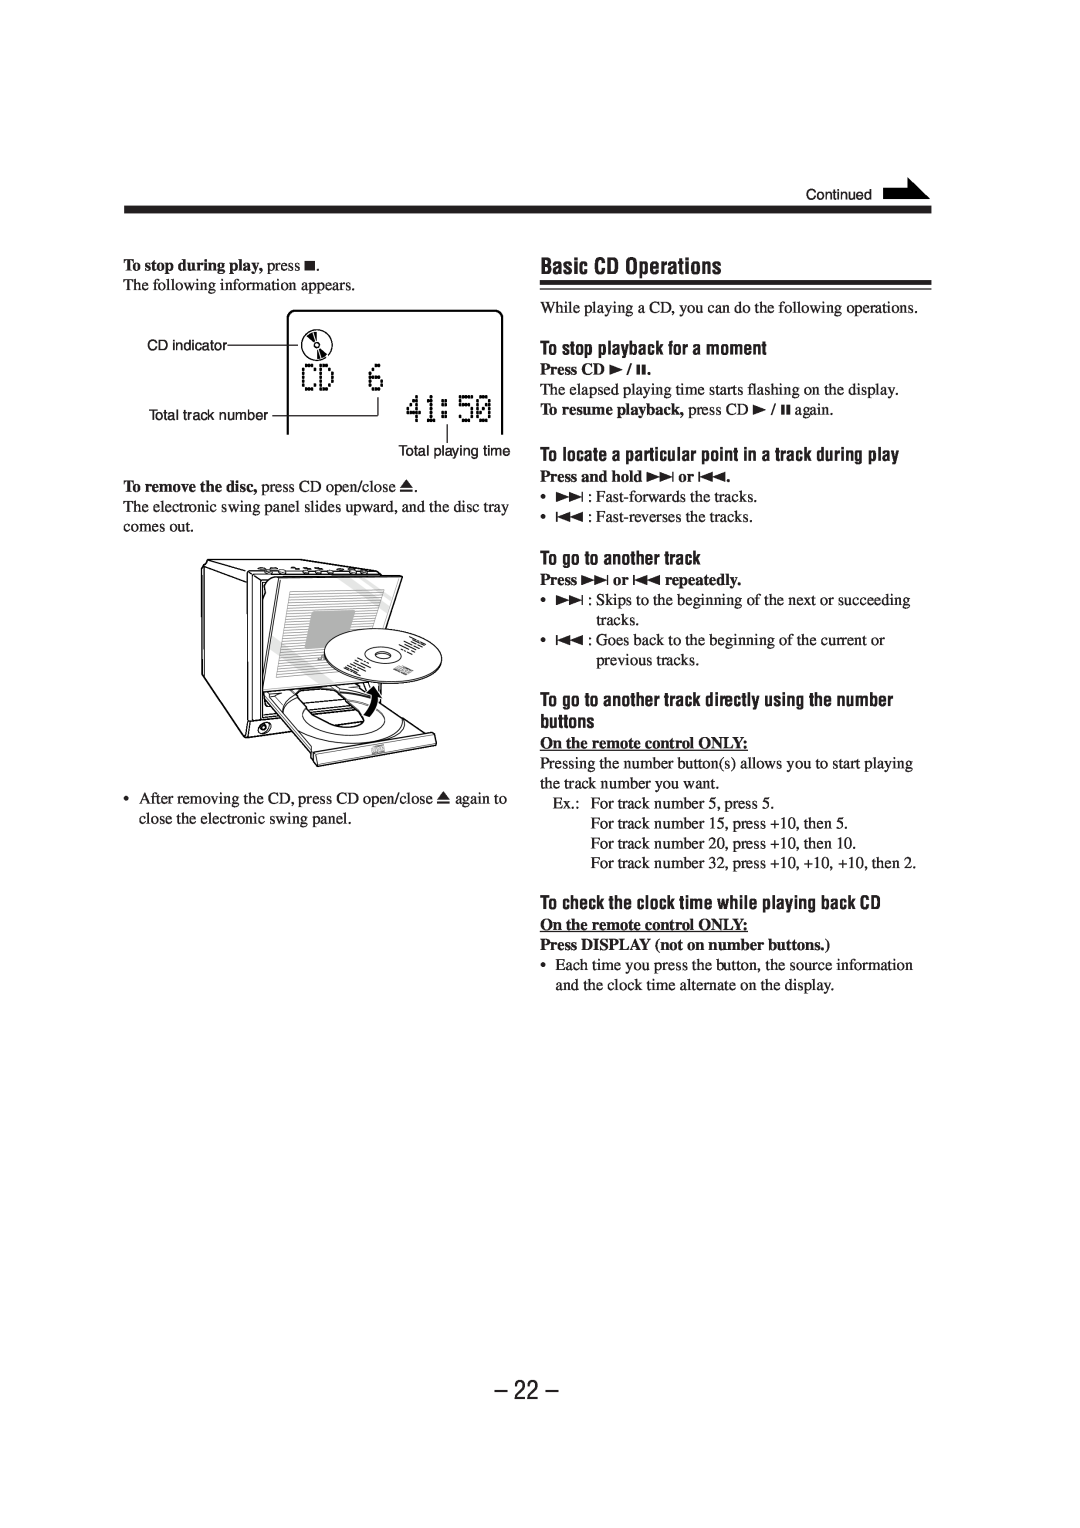 JVC UX-A52R manual Basic CD Operations, To stop playback for a moment, To go to another track 